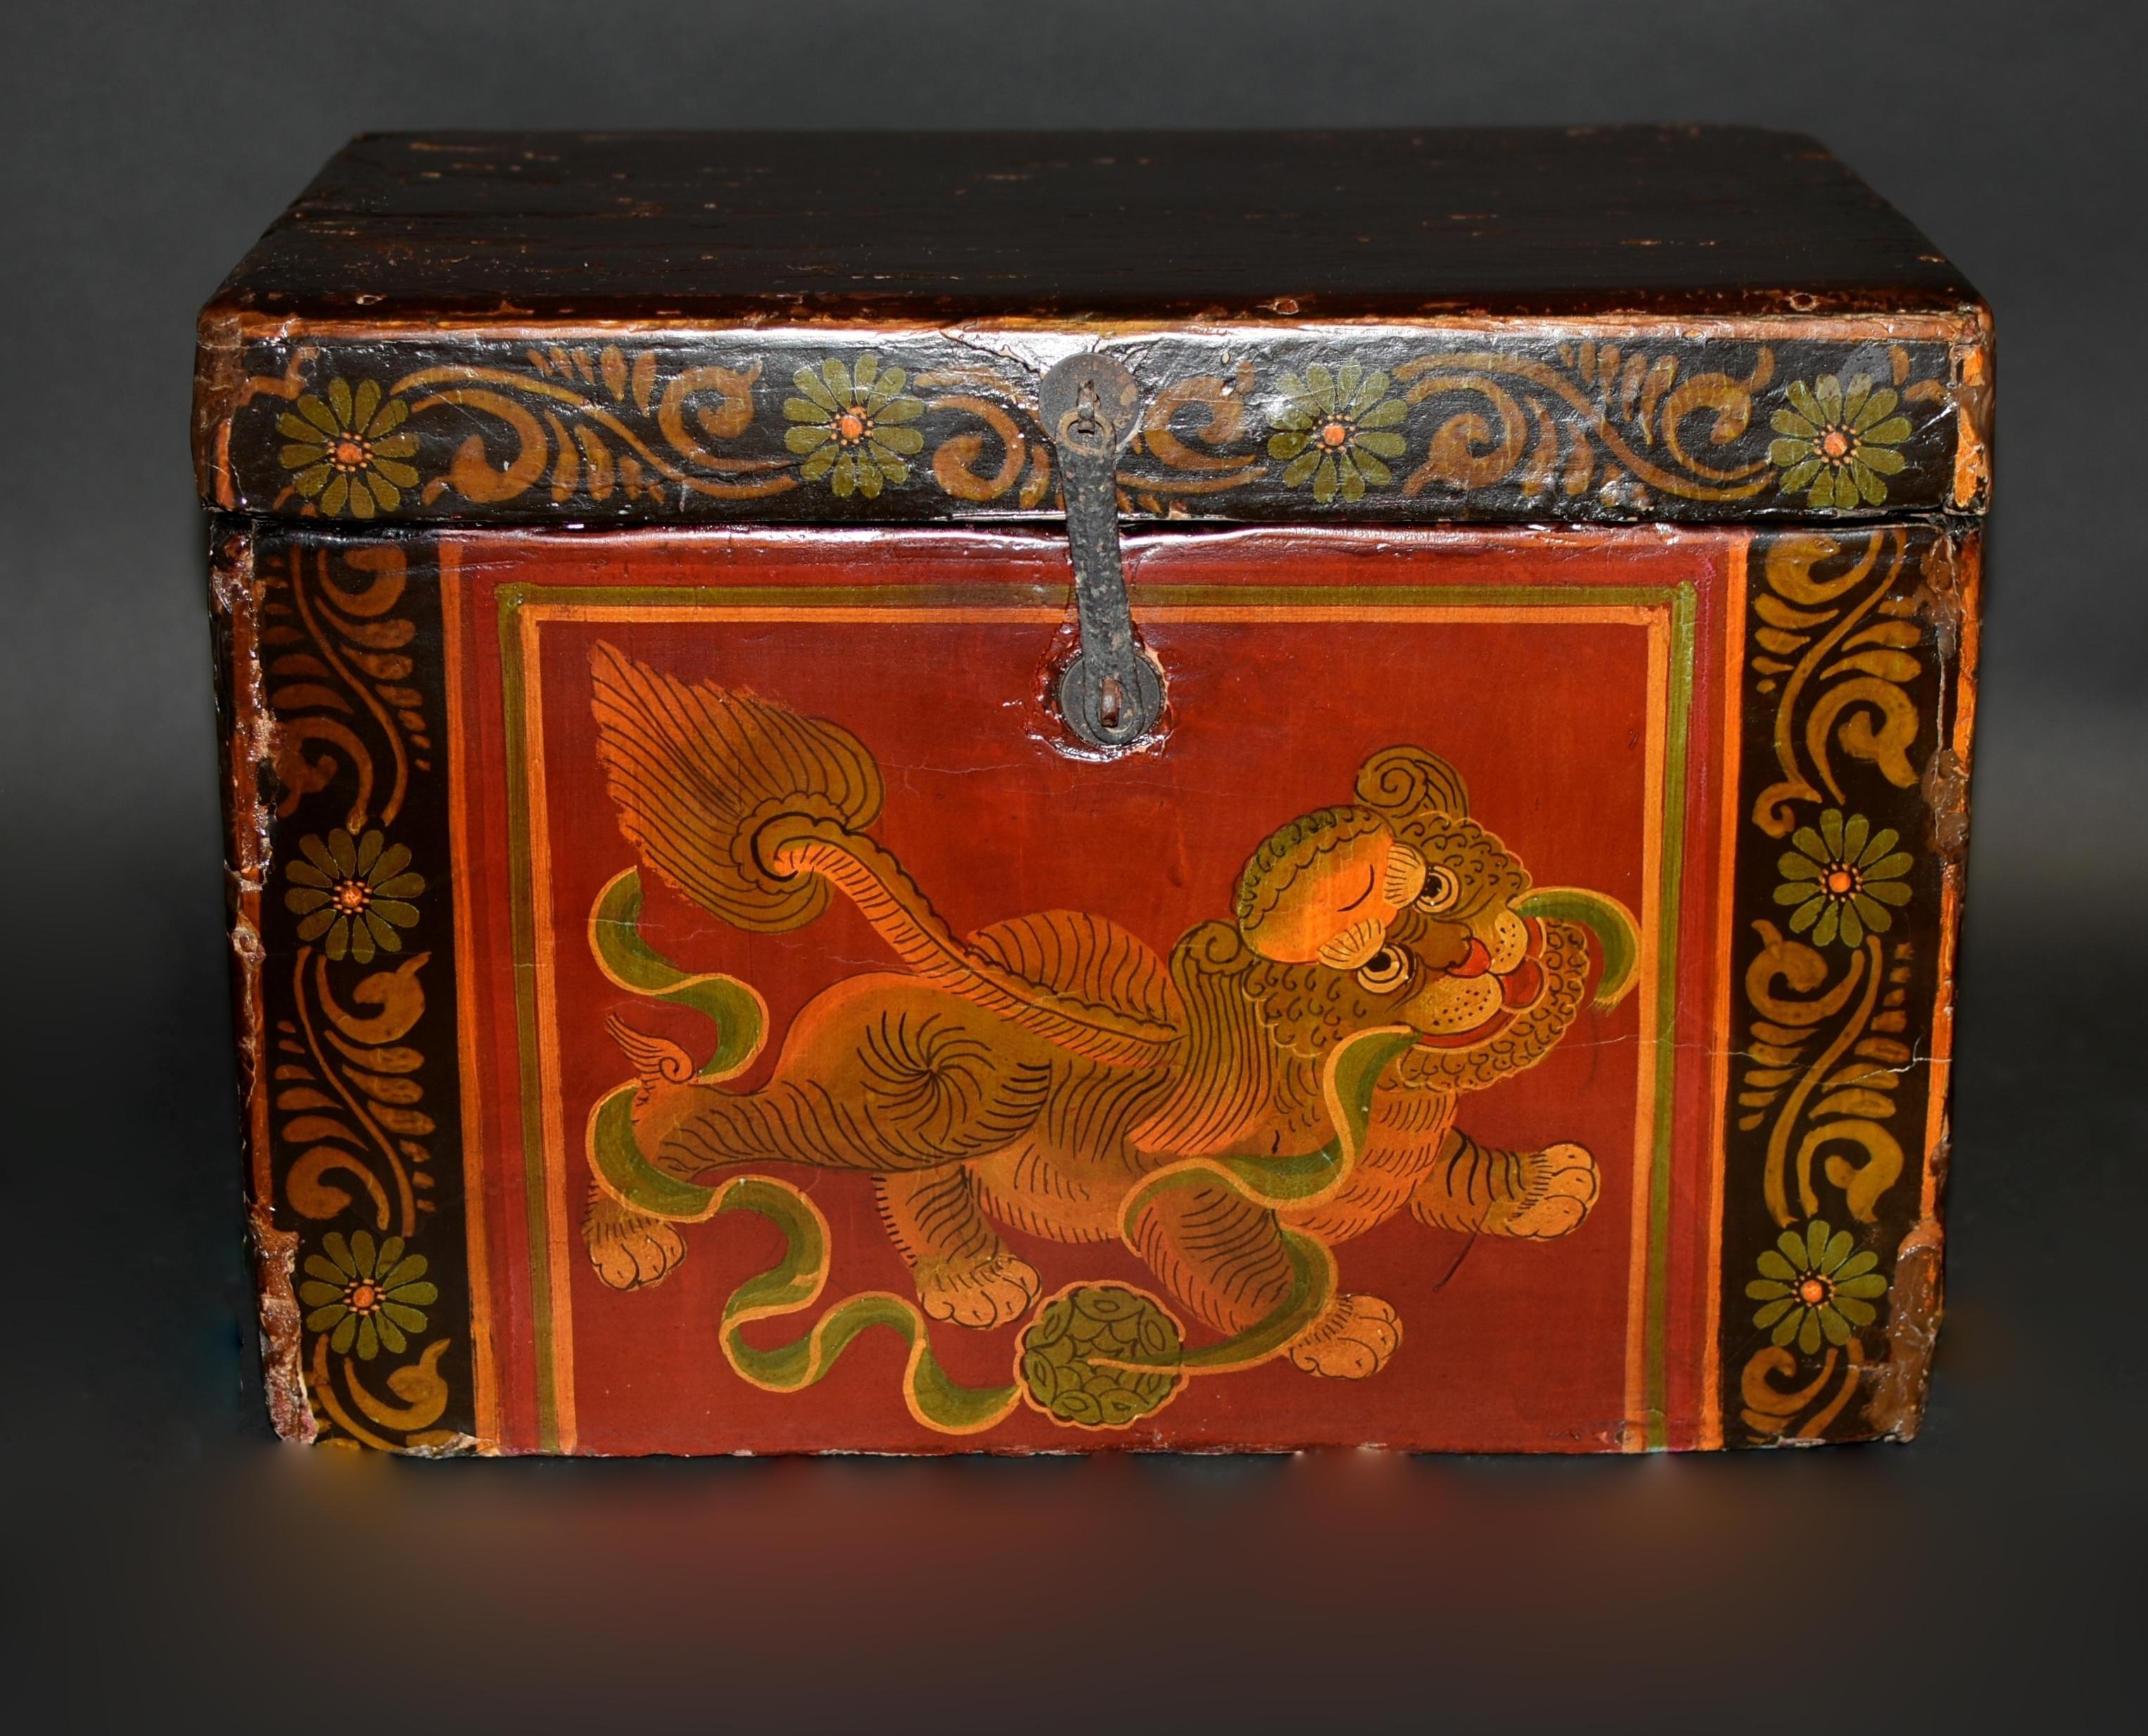 One of our most adorable foo dogs among our limited antique 19th century foo dog box collection. The large head with big innocent eyes and red lips is framed by curled mane. Fleshy paws pressing into the ground, with a wavy green ribbon wrapped